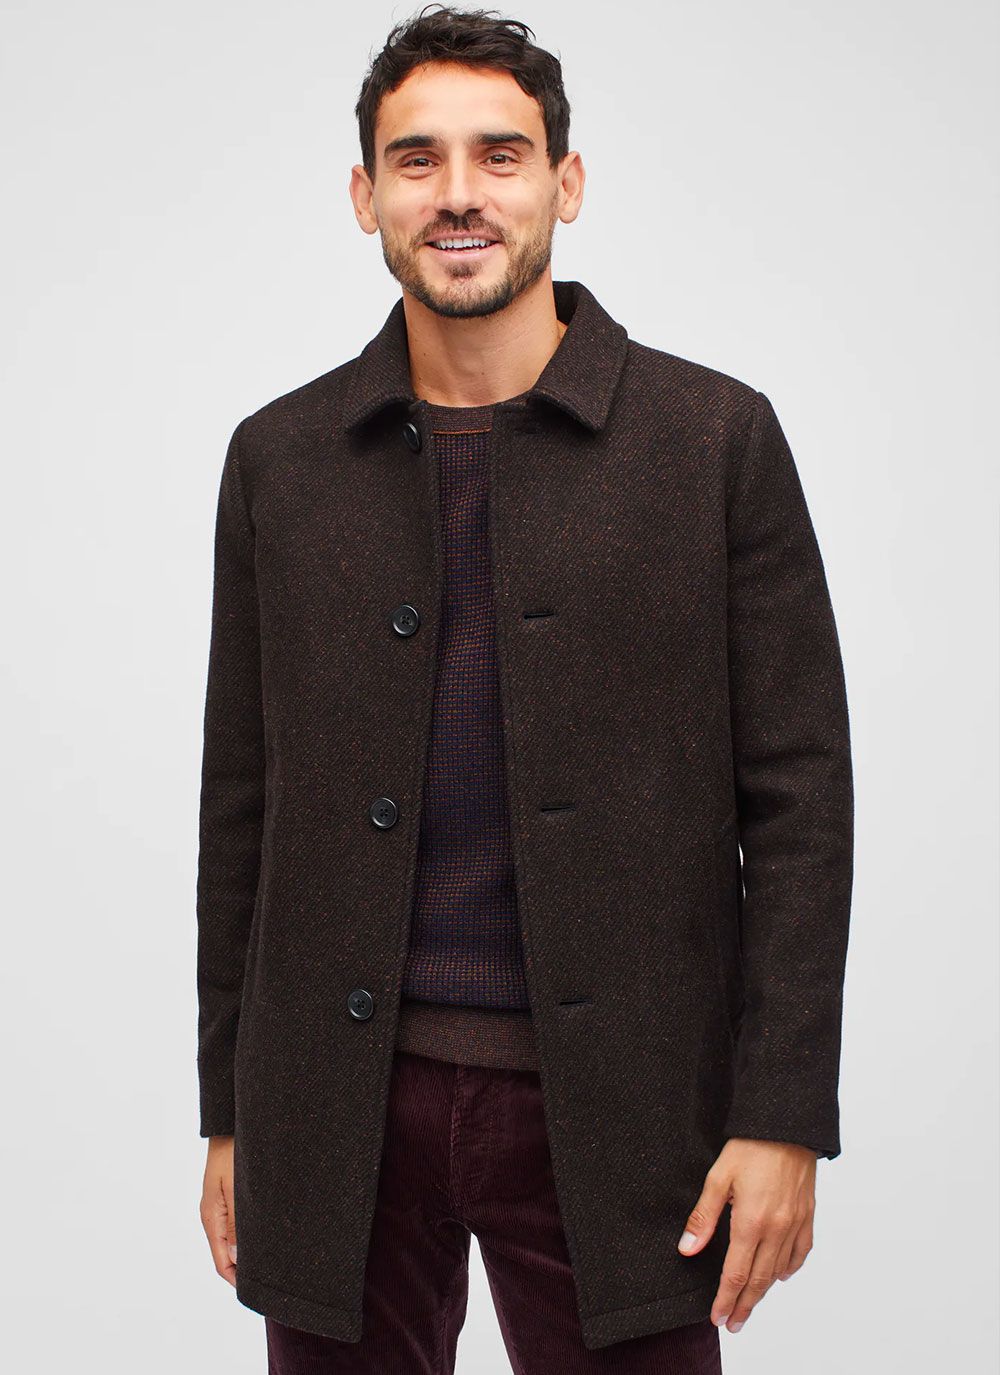 Select the trendy and fashionable mens
pea coats